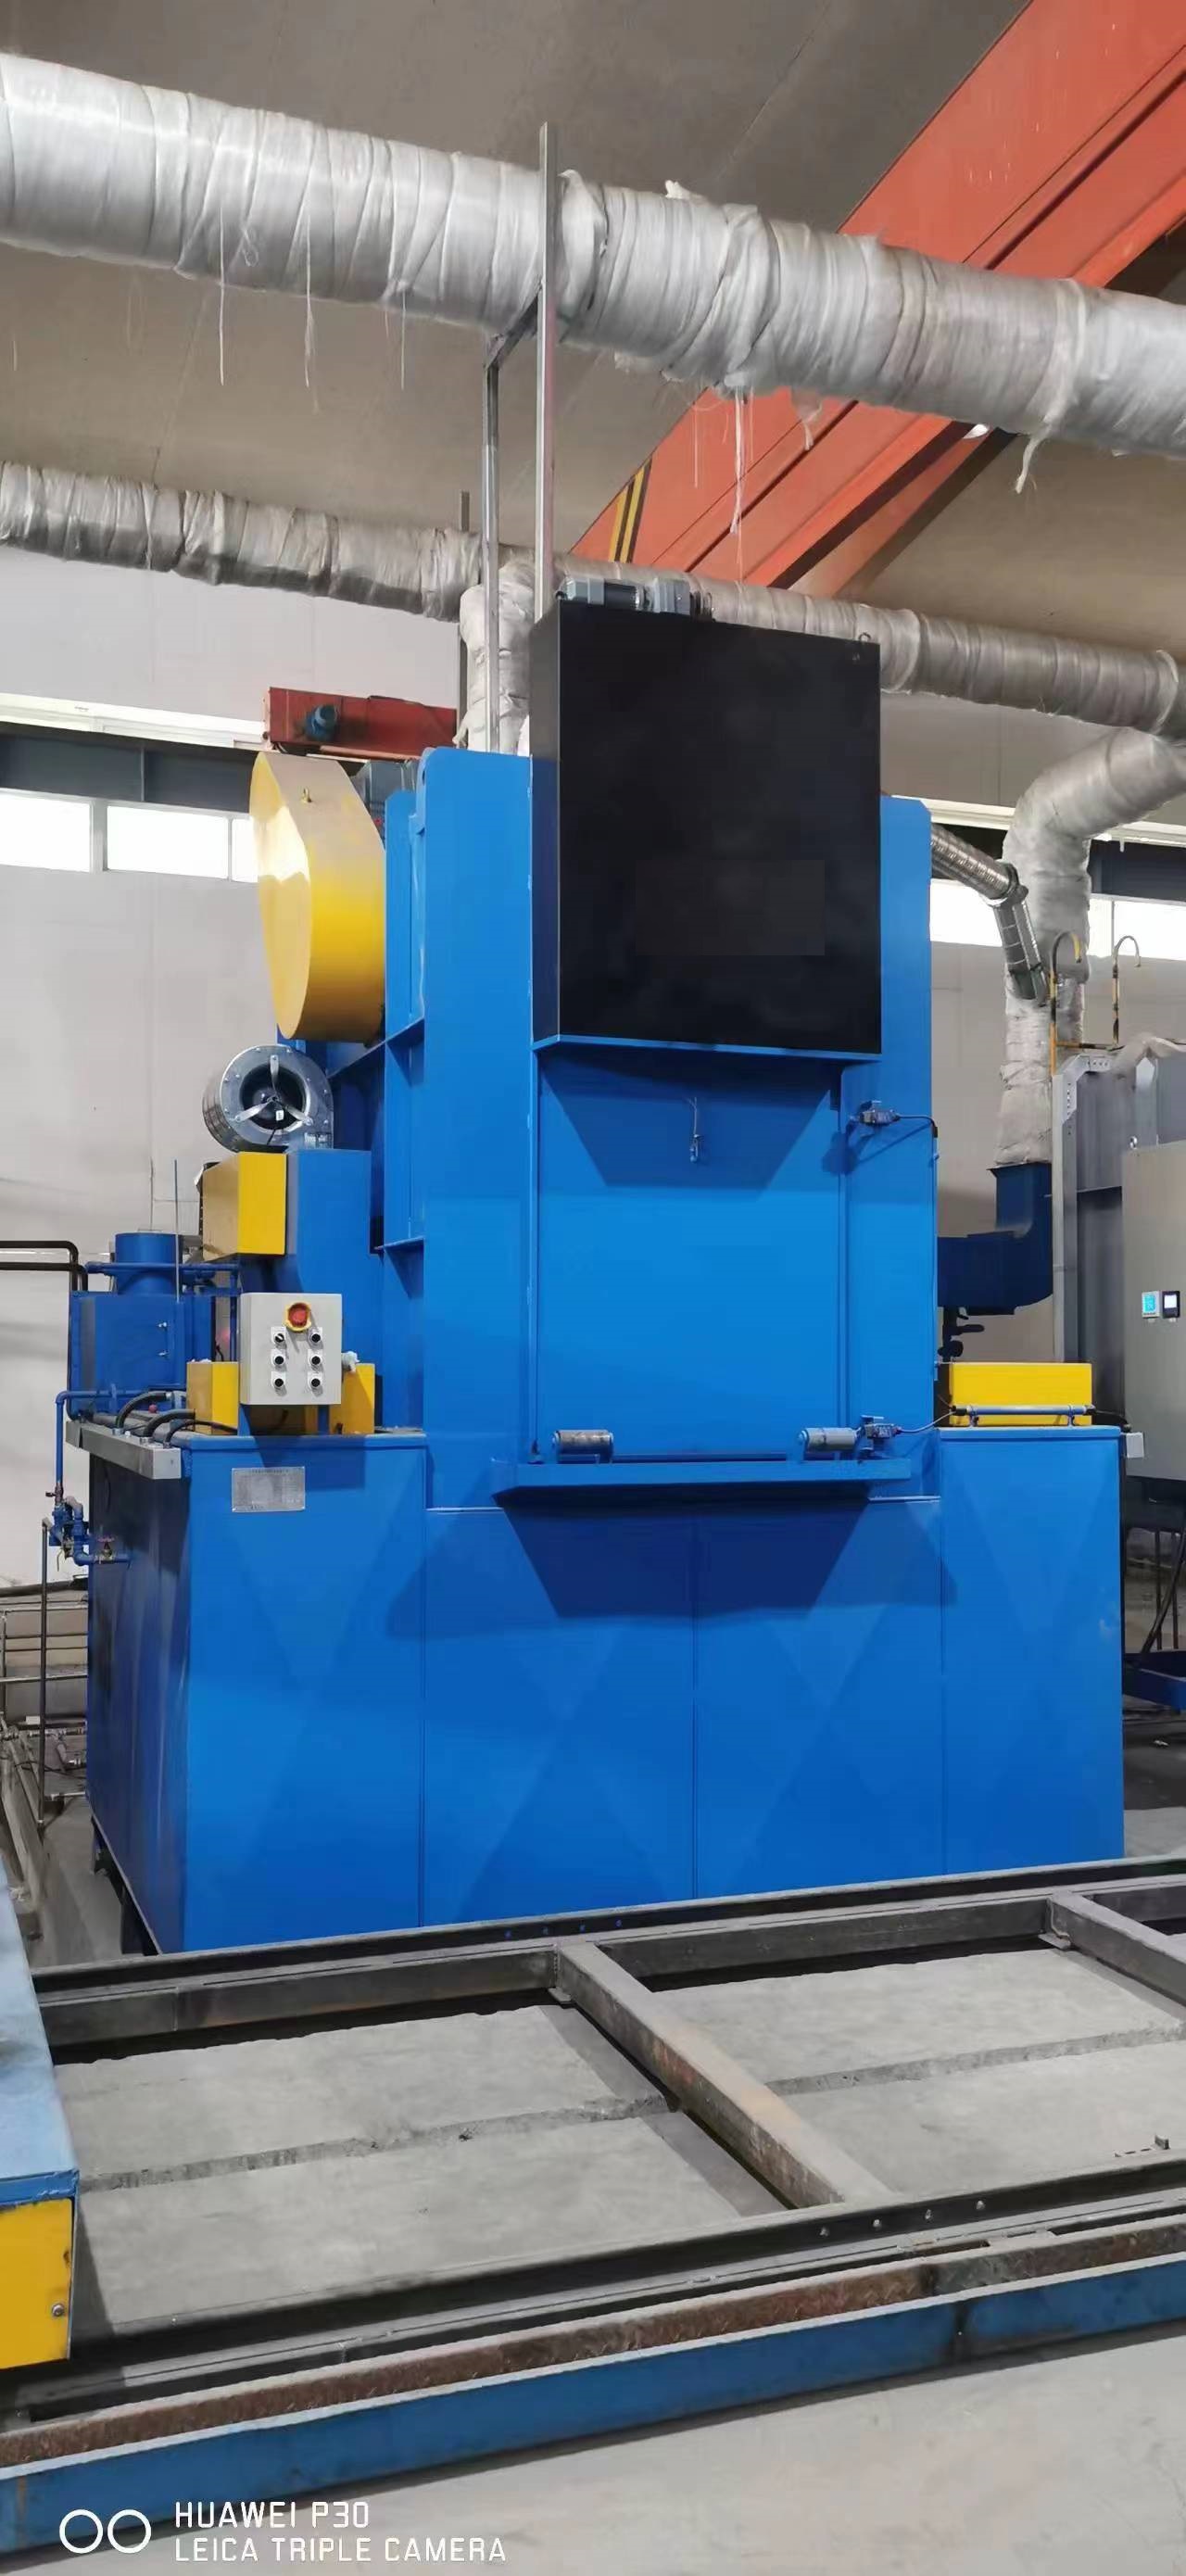 A batch or T-type furnace for Alloy-steel Matrice or Roller shell